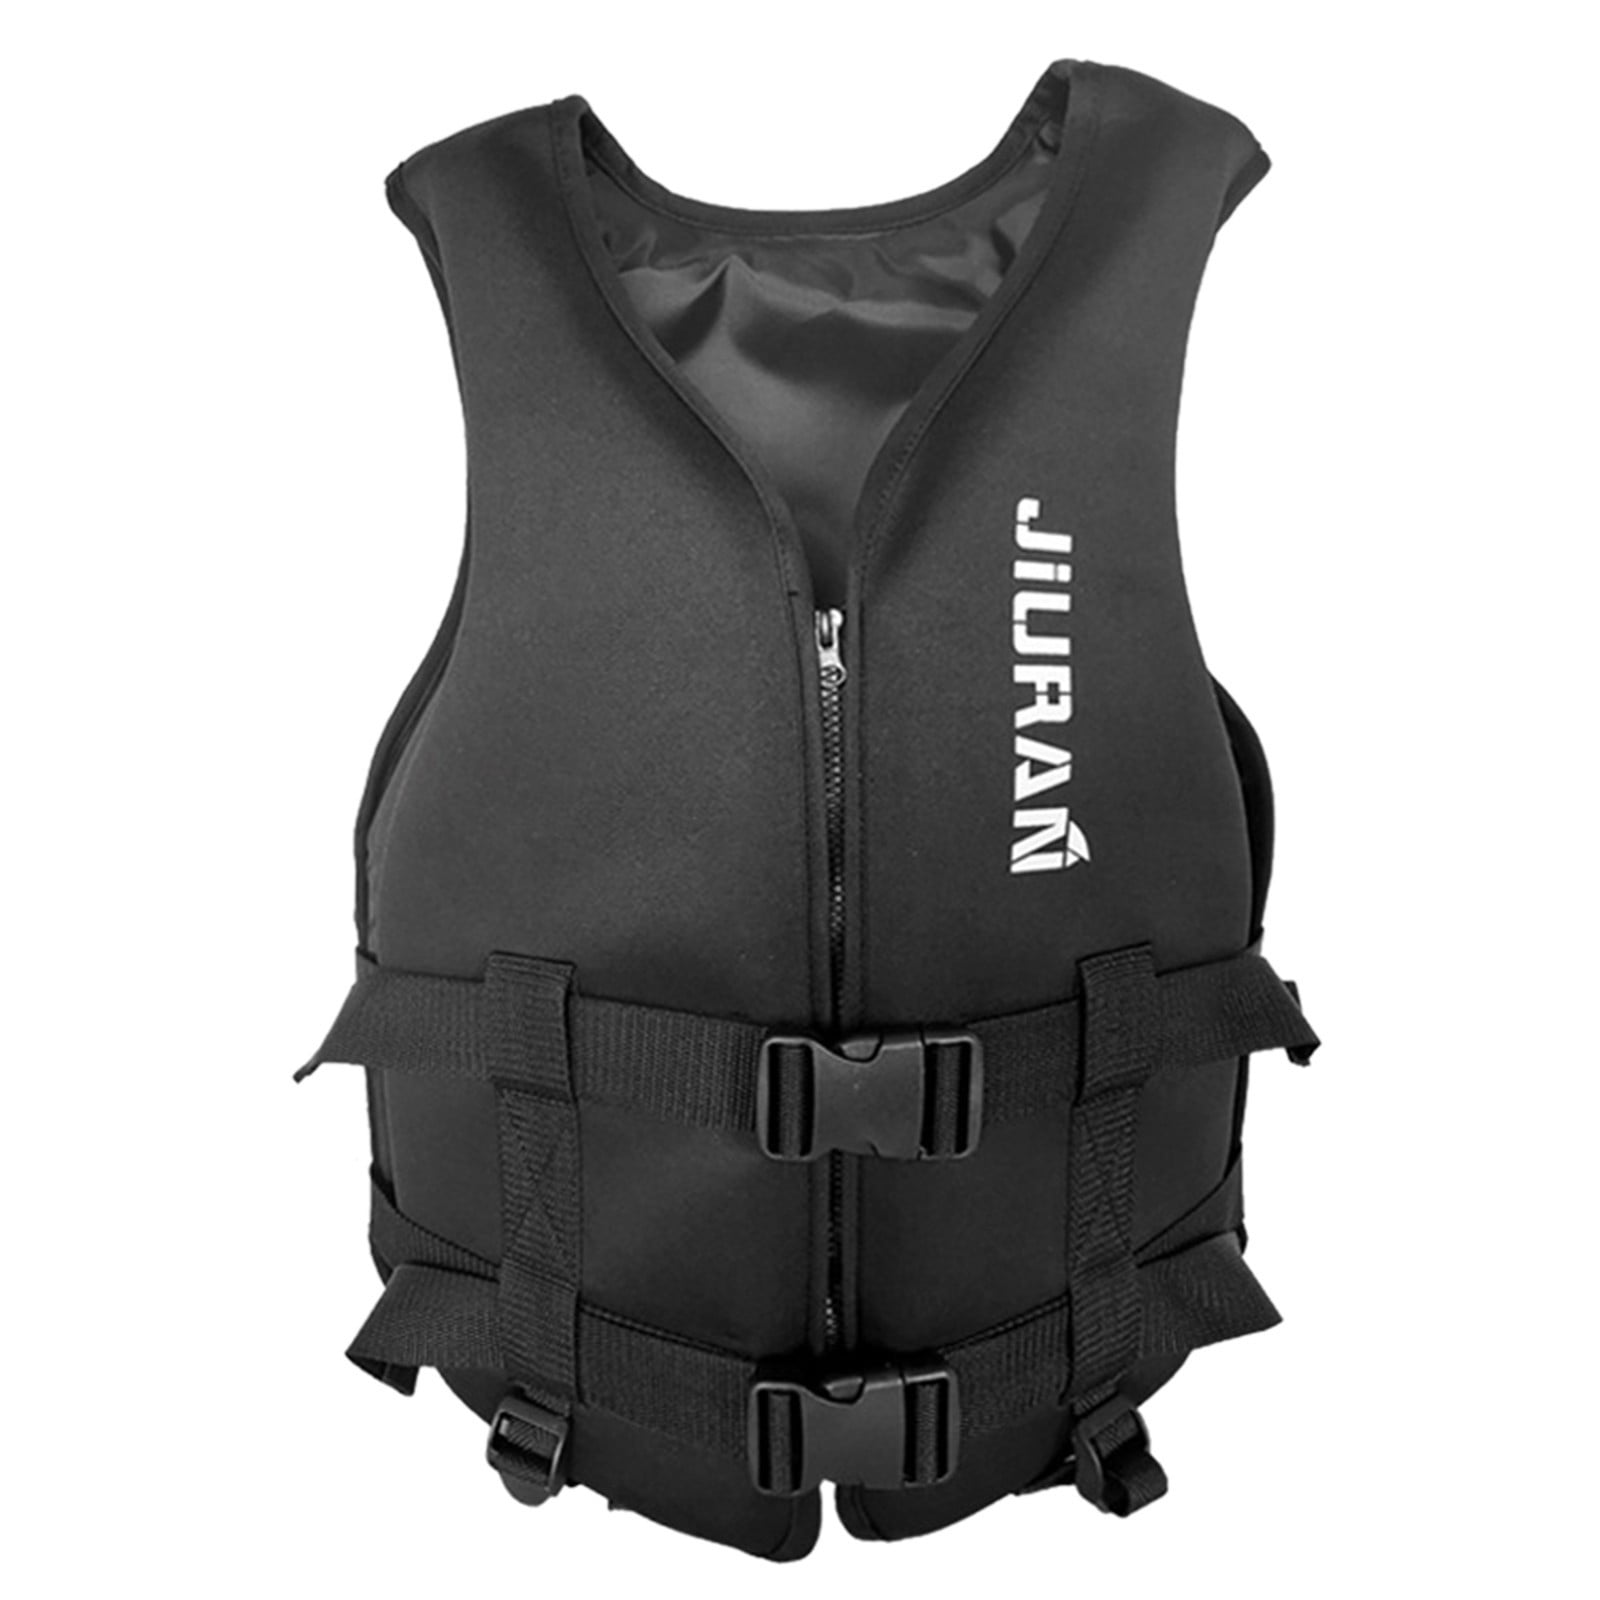 Life Jackets for adults Vest Survival Swimming Life Vest Water Sport Jacket Life Vests for Sailing Watersport Boating Kayaking Jacket Surfing Vest Waistcoat for Sailing/20-120kg Life Jacket Adult 